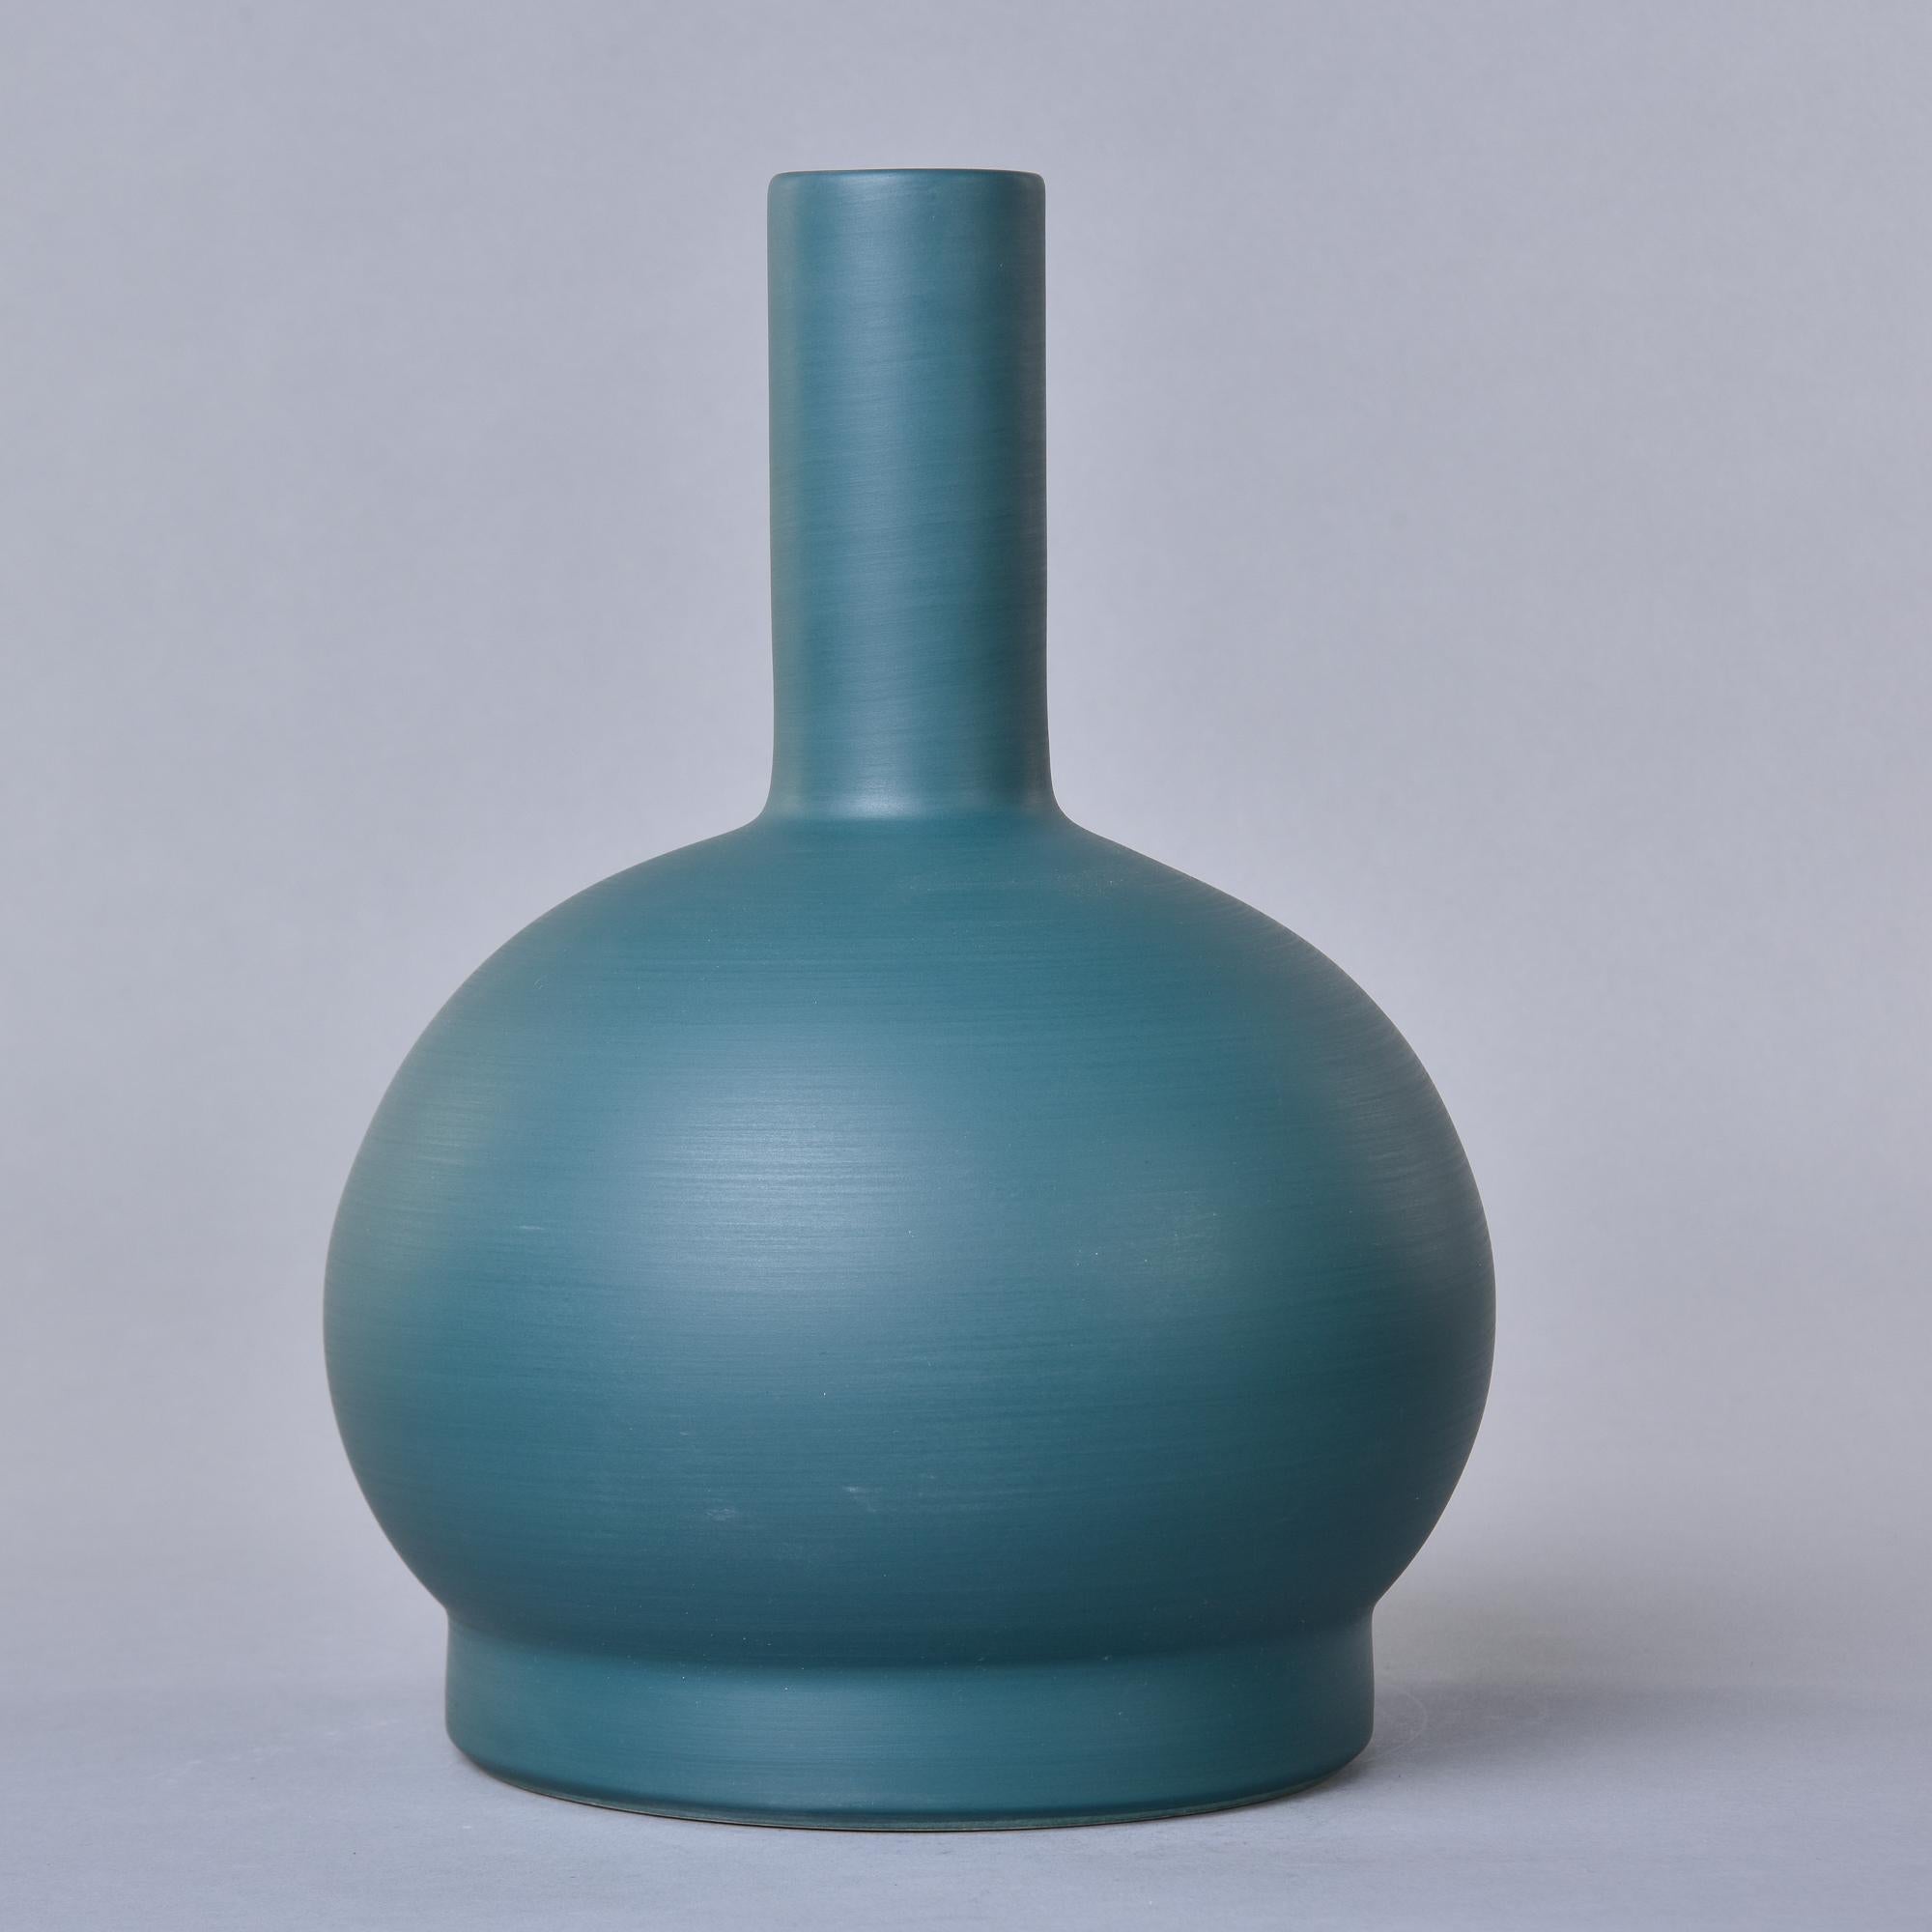 New and imported from Italy, this art pottery vase by Rina Menardi is a thin-walled vessel with generous proportions. Round, globe-shaped base with a tall, narrow neck and saturated teal green glaze. Underside of base has maker’s mark. New with no